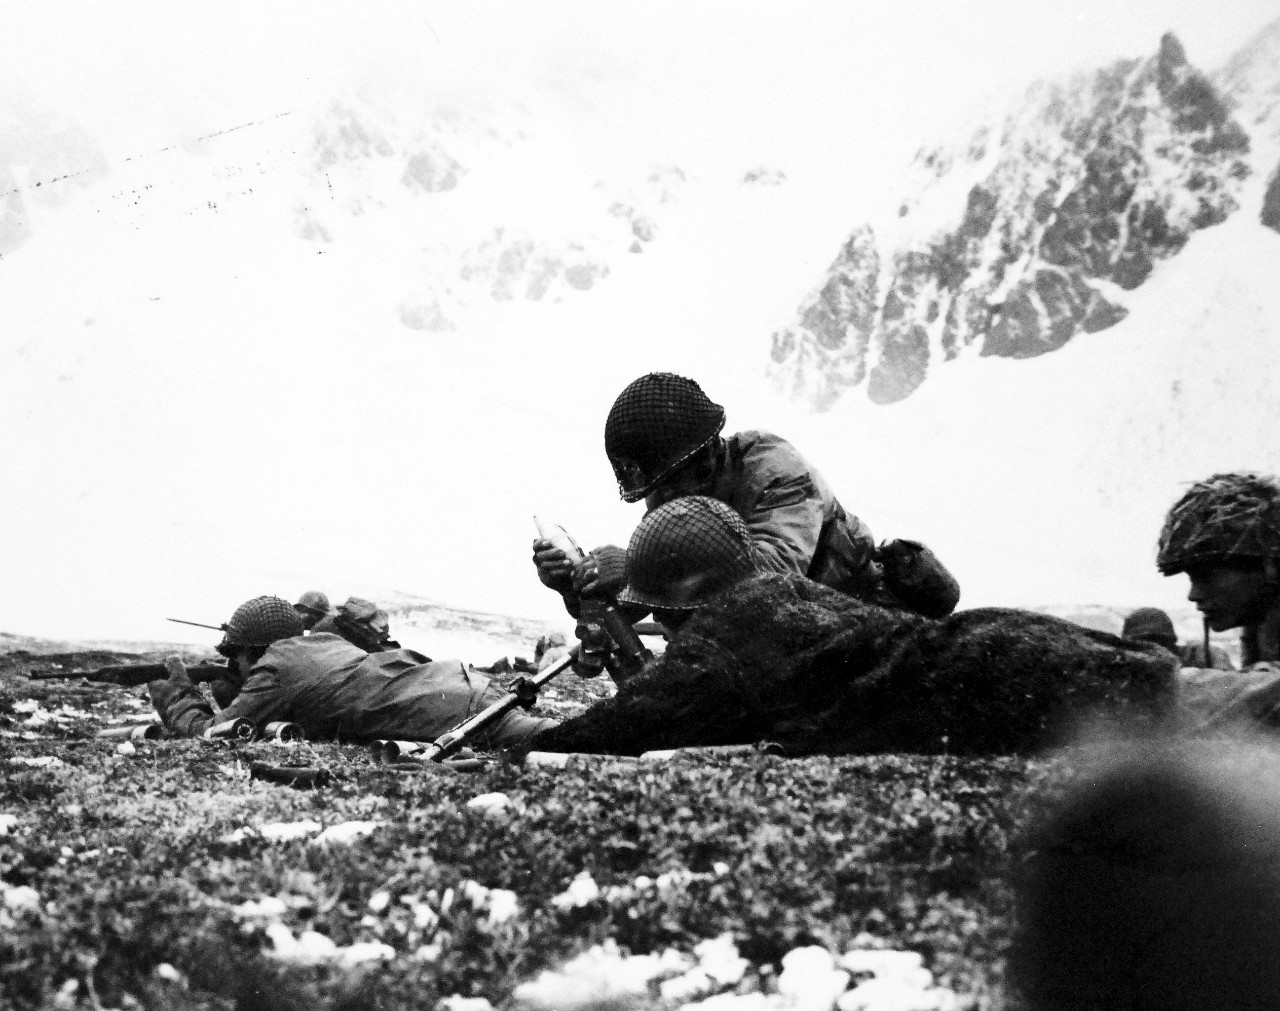 LC-Lot-803-34:  Aleutian Islands Campaign, June 1942 - August 1943.   Allied Landing on Attu Island, May 11 1943.  Tenseness of Battle Grips These Men on Attu Ridge.  High upon Chicagof Ridge overlooking Chicagof Harbor, American soldiers were so intent on their job that the Navy Combat Photograph Unit cameraman didn’t have to worry about “camera muggers.”  The men in the foreground load a shell into a small mortar.  Note the fur jacket worn by the man in the prone position.  It was taken from a dead Japanese.  Chicagof Harbor was the last Japanese stronghold to fall in the fighting on Attu Island in the Aleutians.   U.S. Navy photograph, released July 20, 1943.   Photographed through Mylar sleeve.  Courtesy of the Library of Congress.  (2015/11/06).